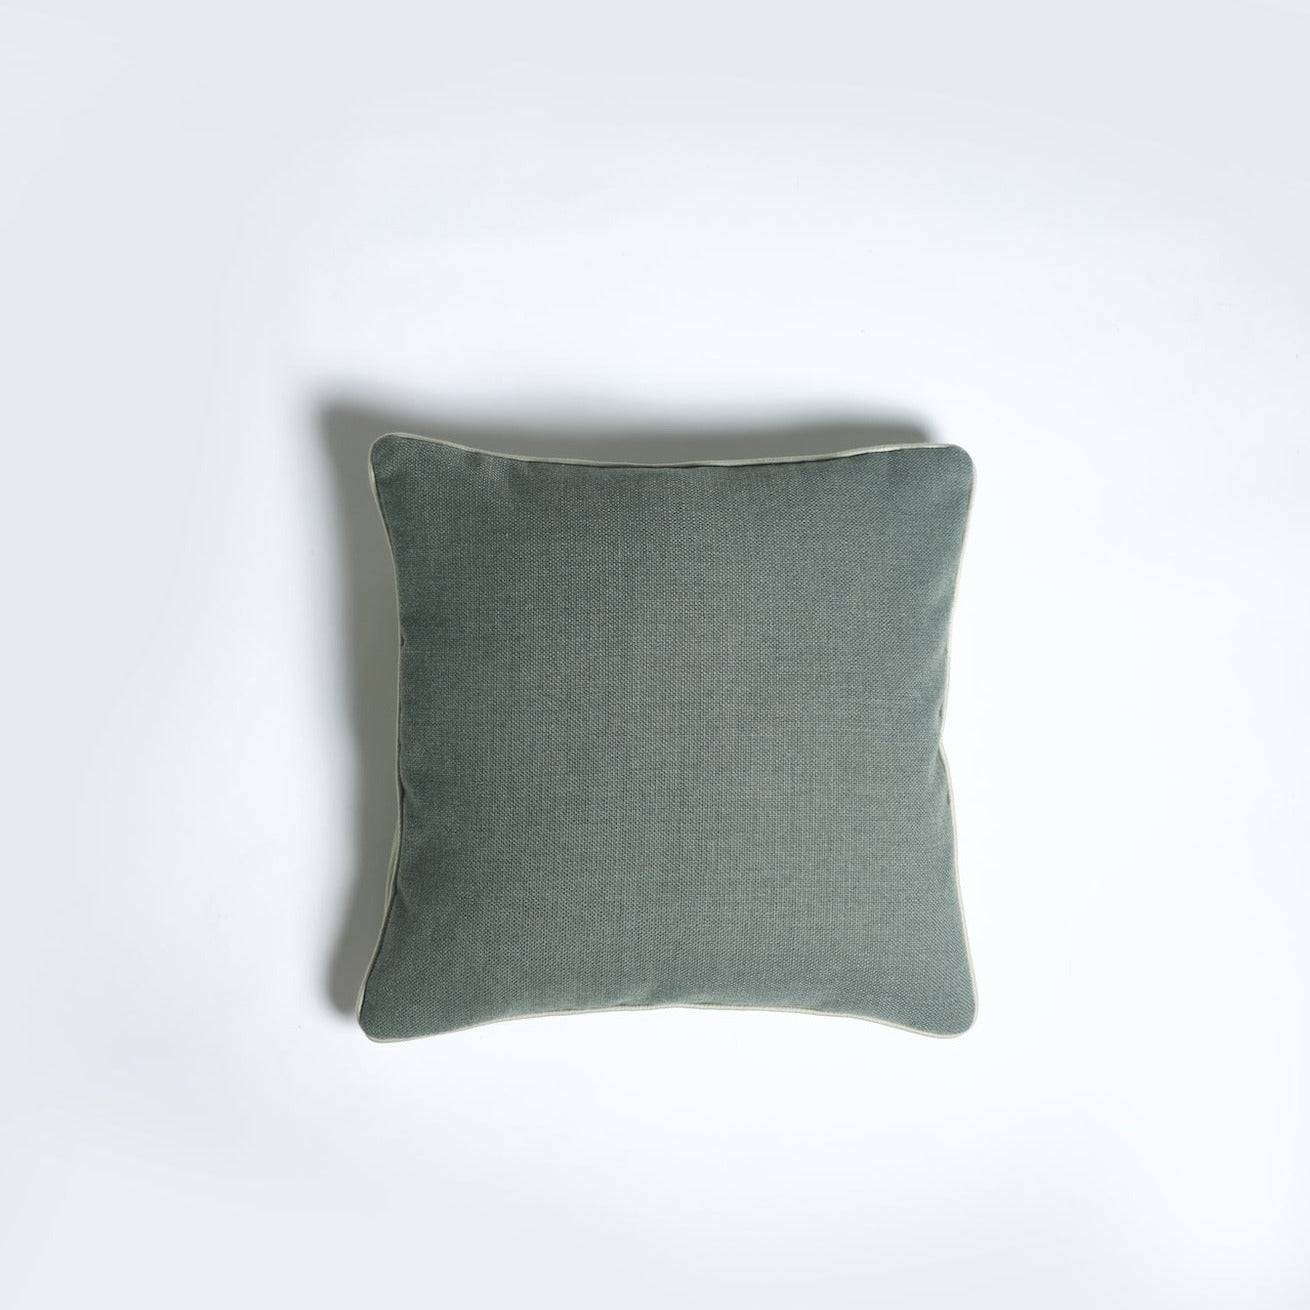 Meadow Woven Cushion Cover 18 X 18 inches